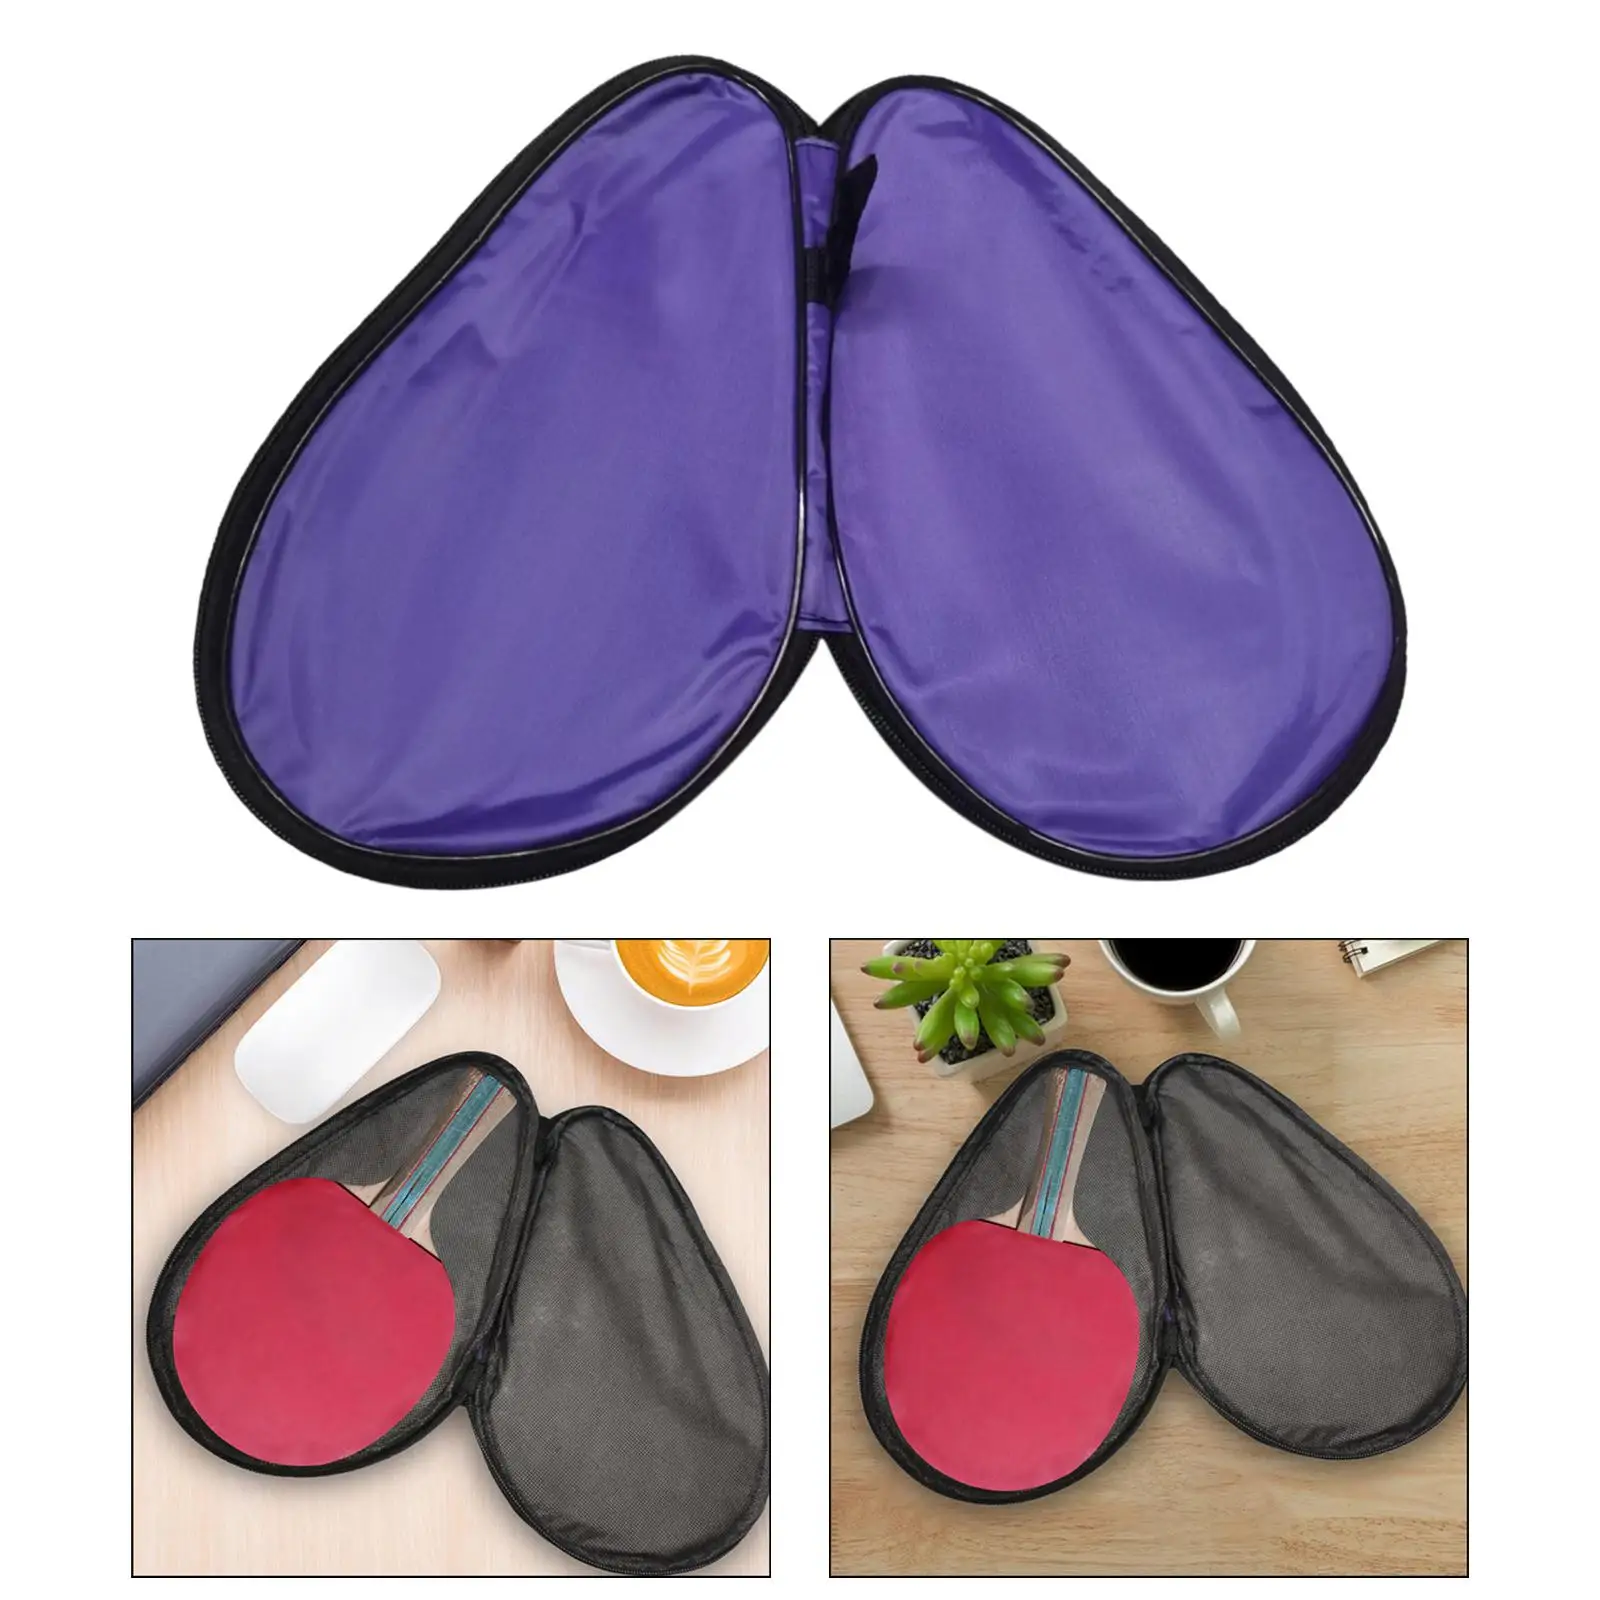 Ping Pong Case Waterproof Protective Storage Table Tennis Racket Cover Table Tennis Bag for Gym Competition Adult Training